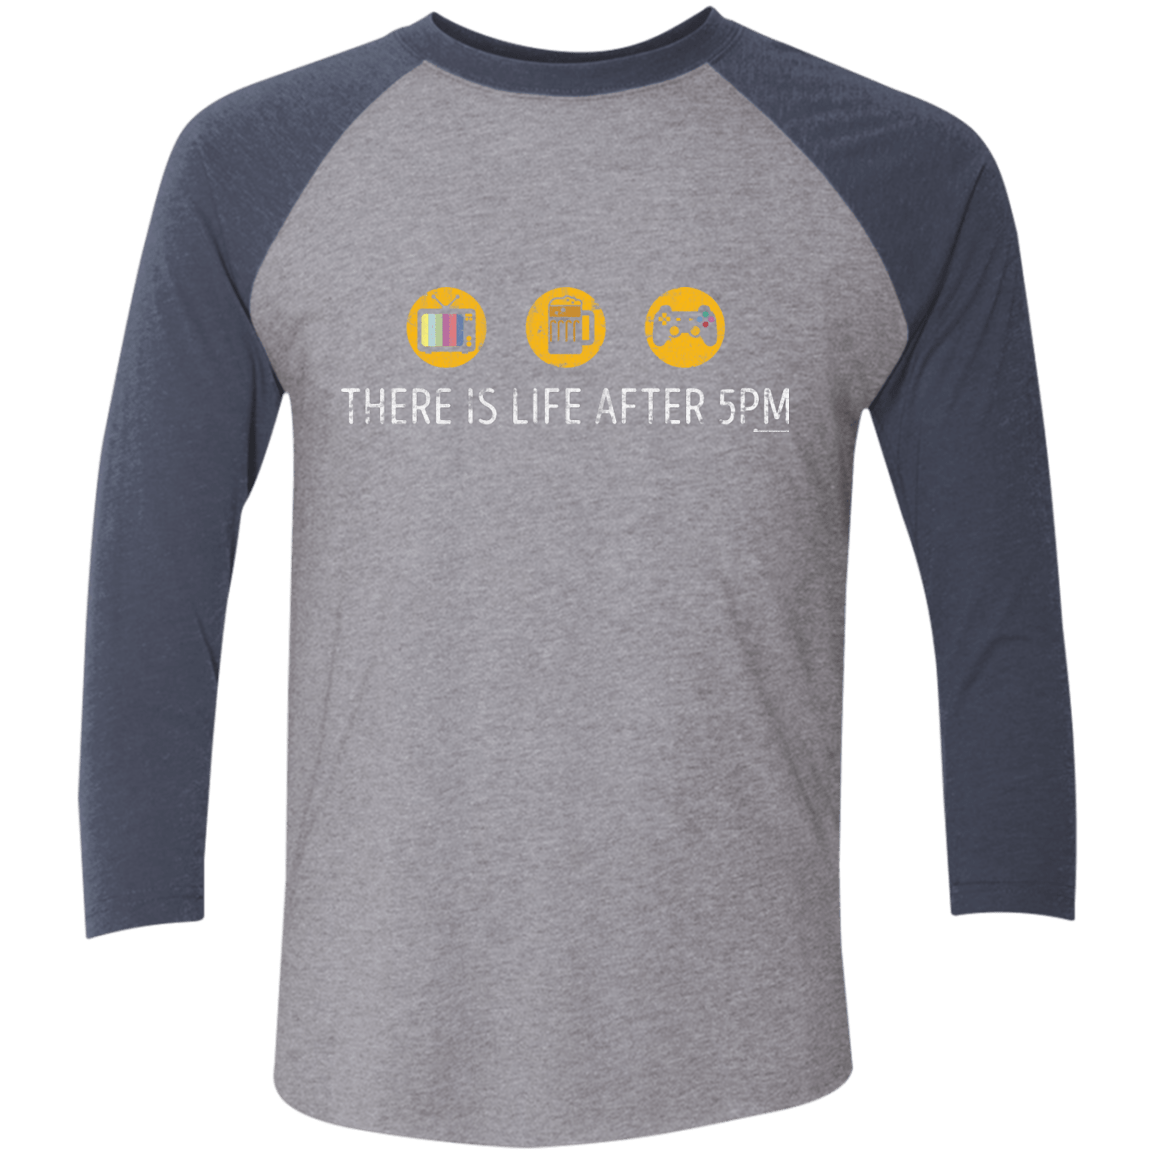 T-Shirts Premium Heather/Vintage Navy / X-Small There Is Life After 5PM Men's Triblend 3/4 Sleeve